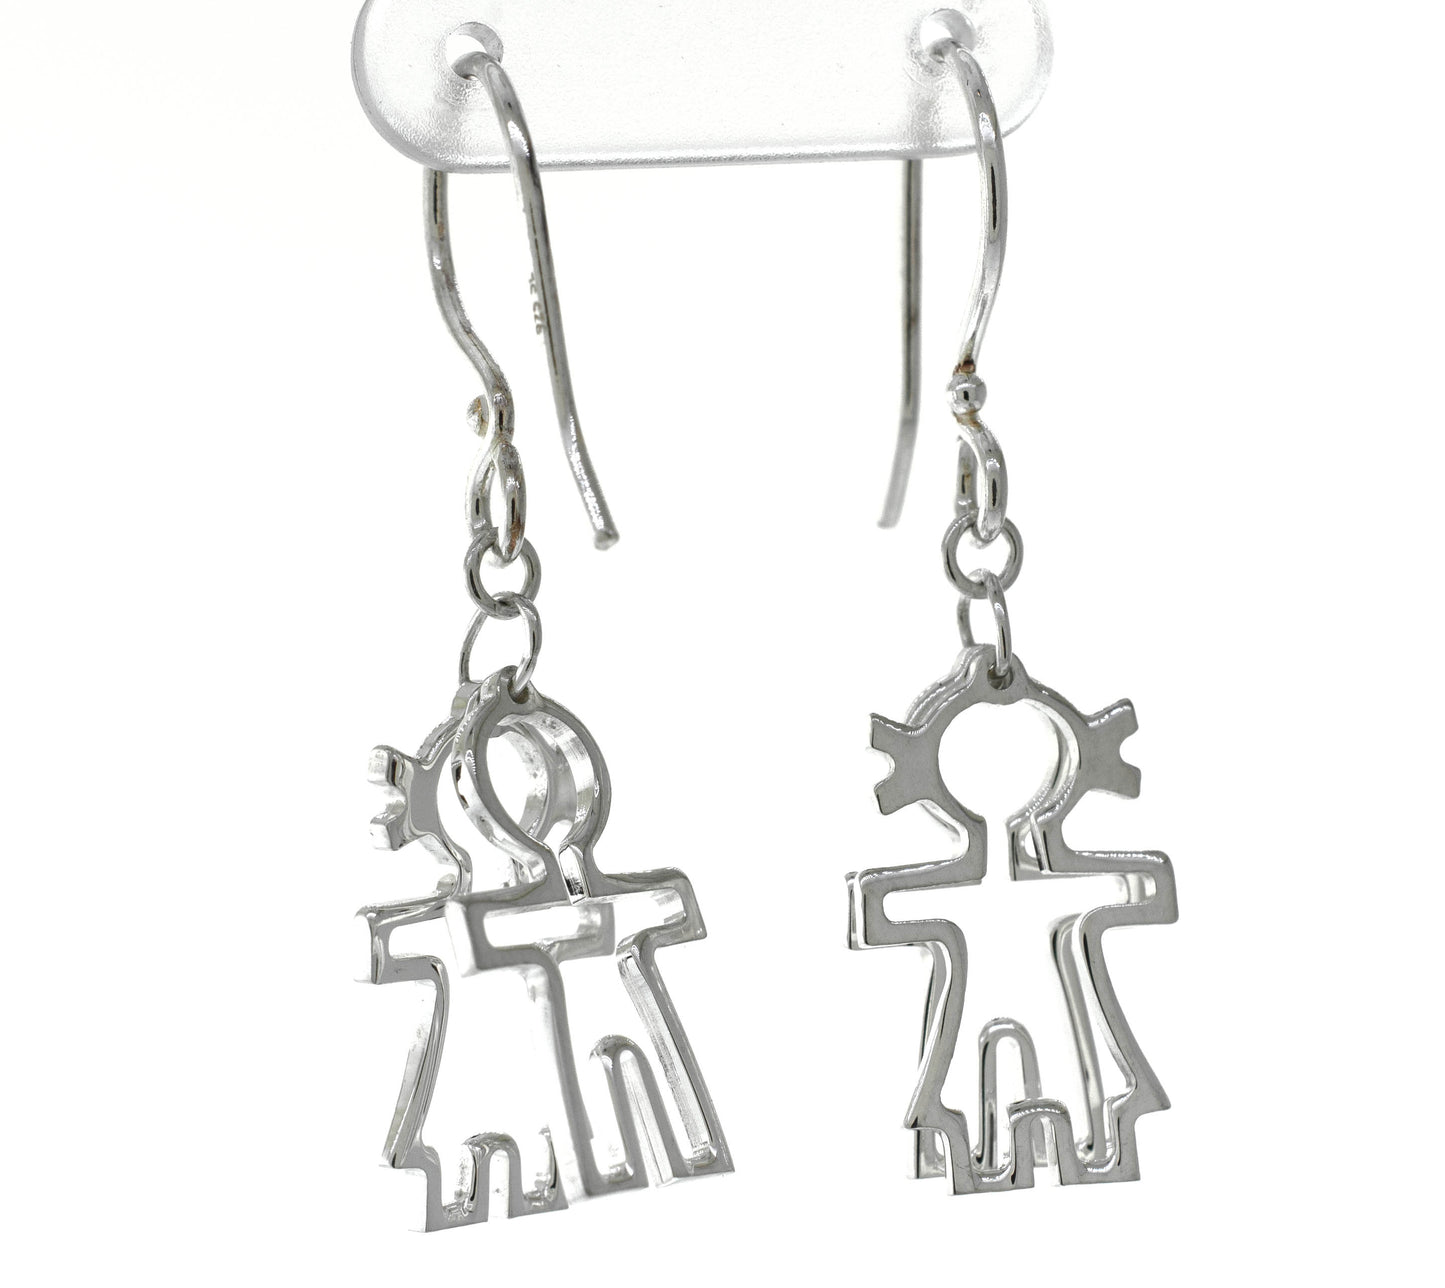 A pair of Super Silver Little Humans Earrings, featuring two people, symbolizing love and humanity.